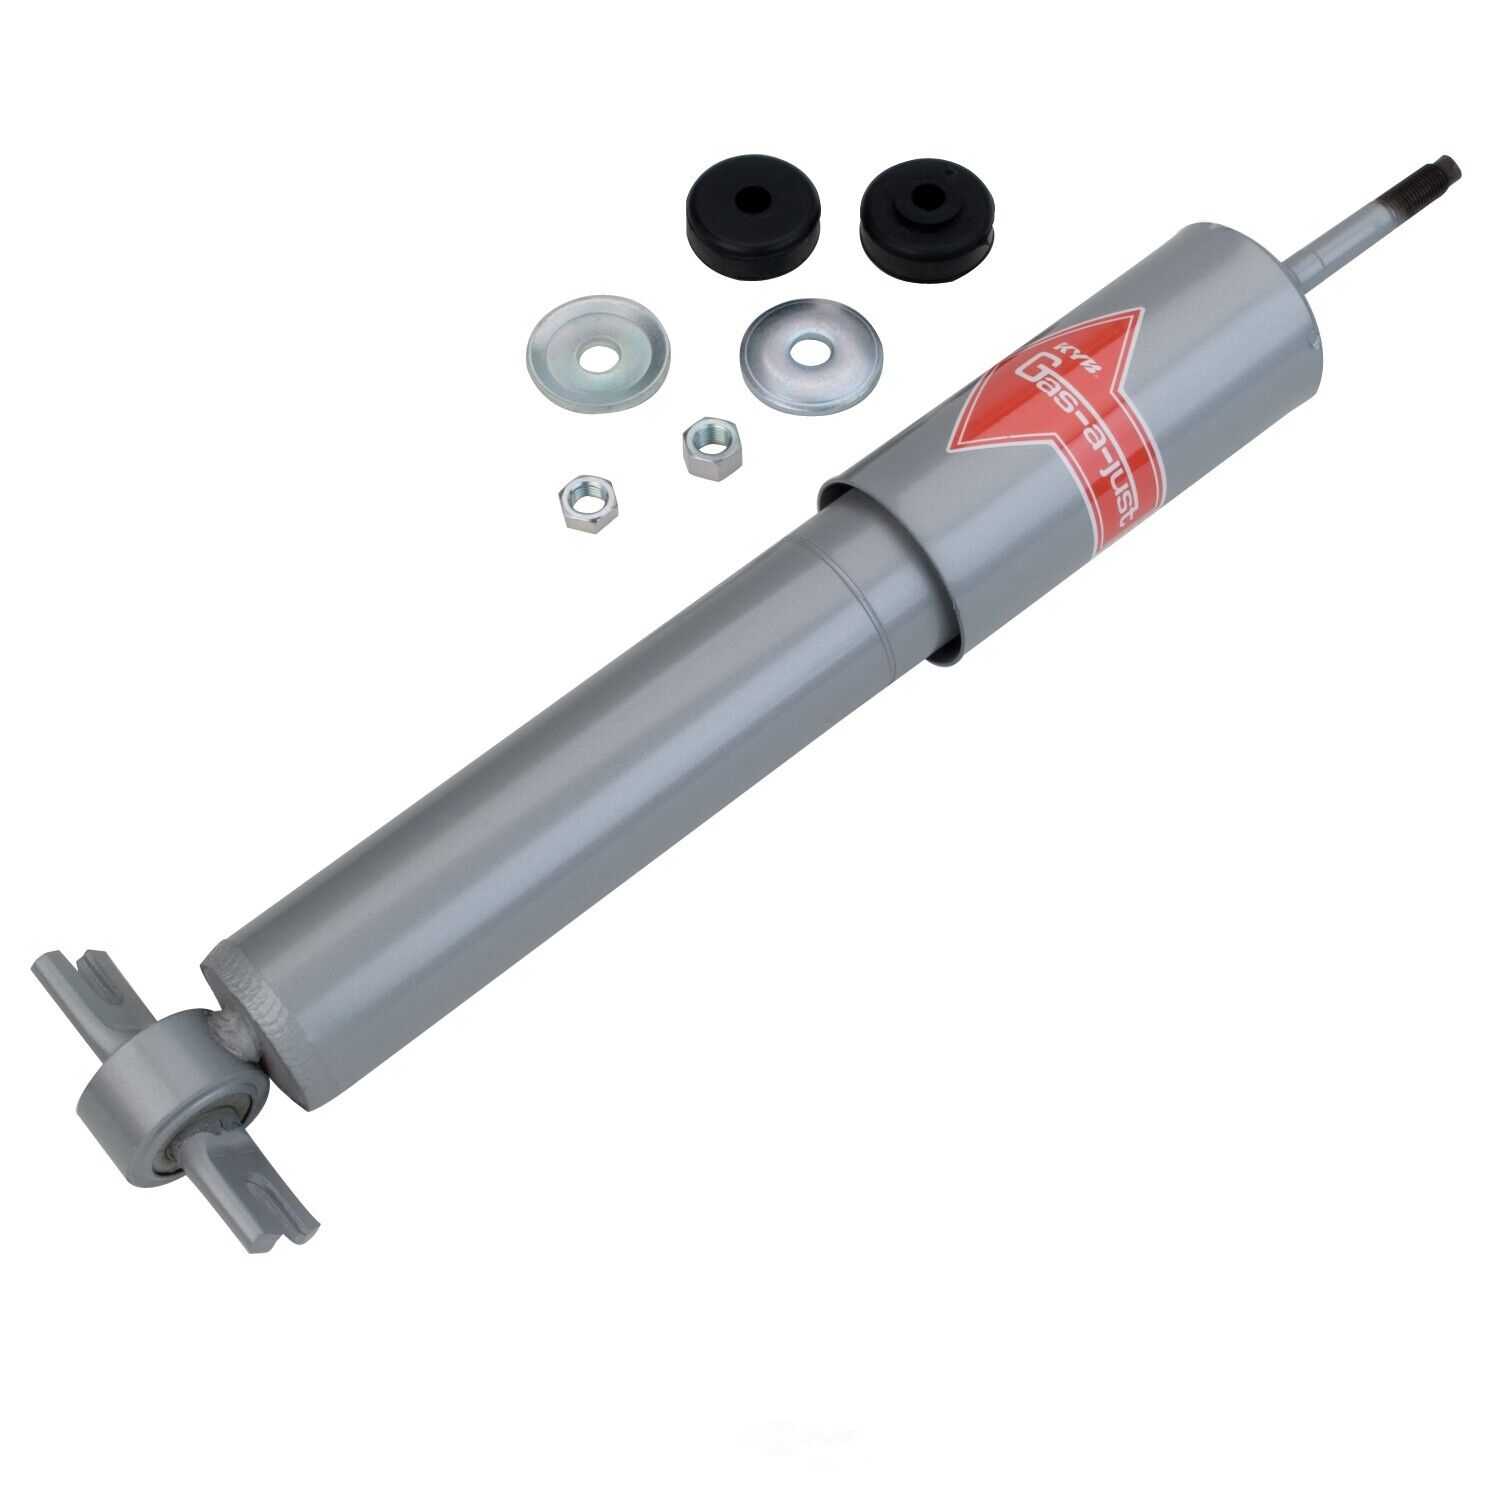 Suspension Shock Absorber-Gas-a-Just Shock Absorber KYB fits 89-96 Corvette